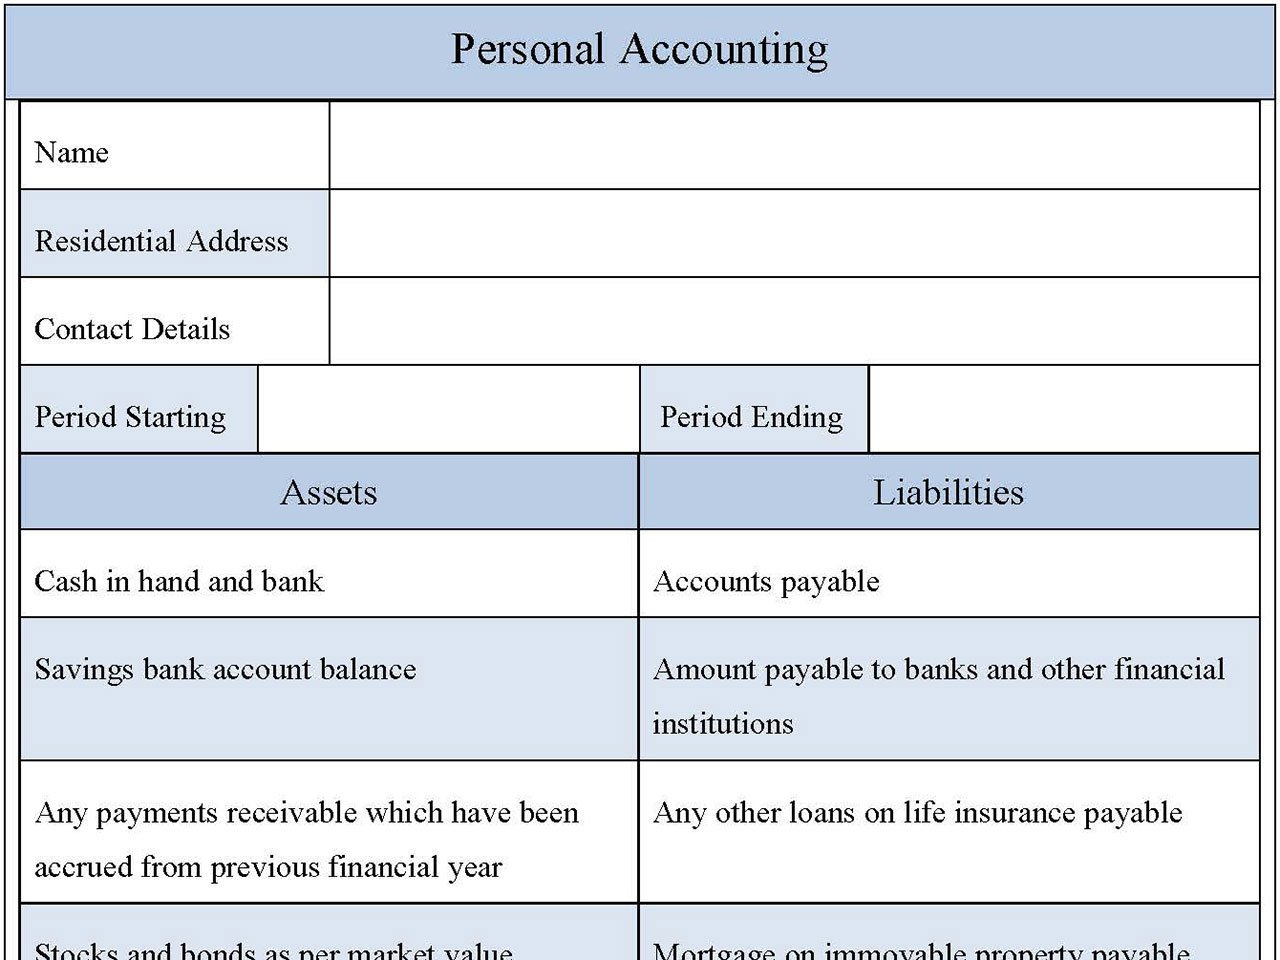 Personal Accounting Form